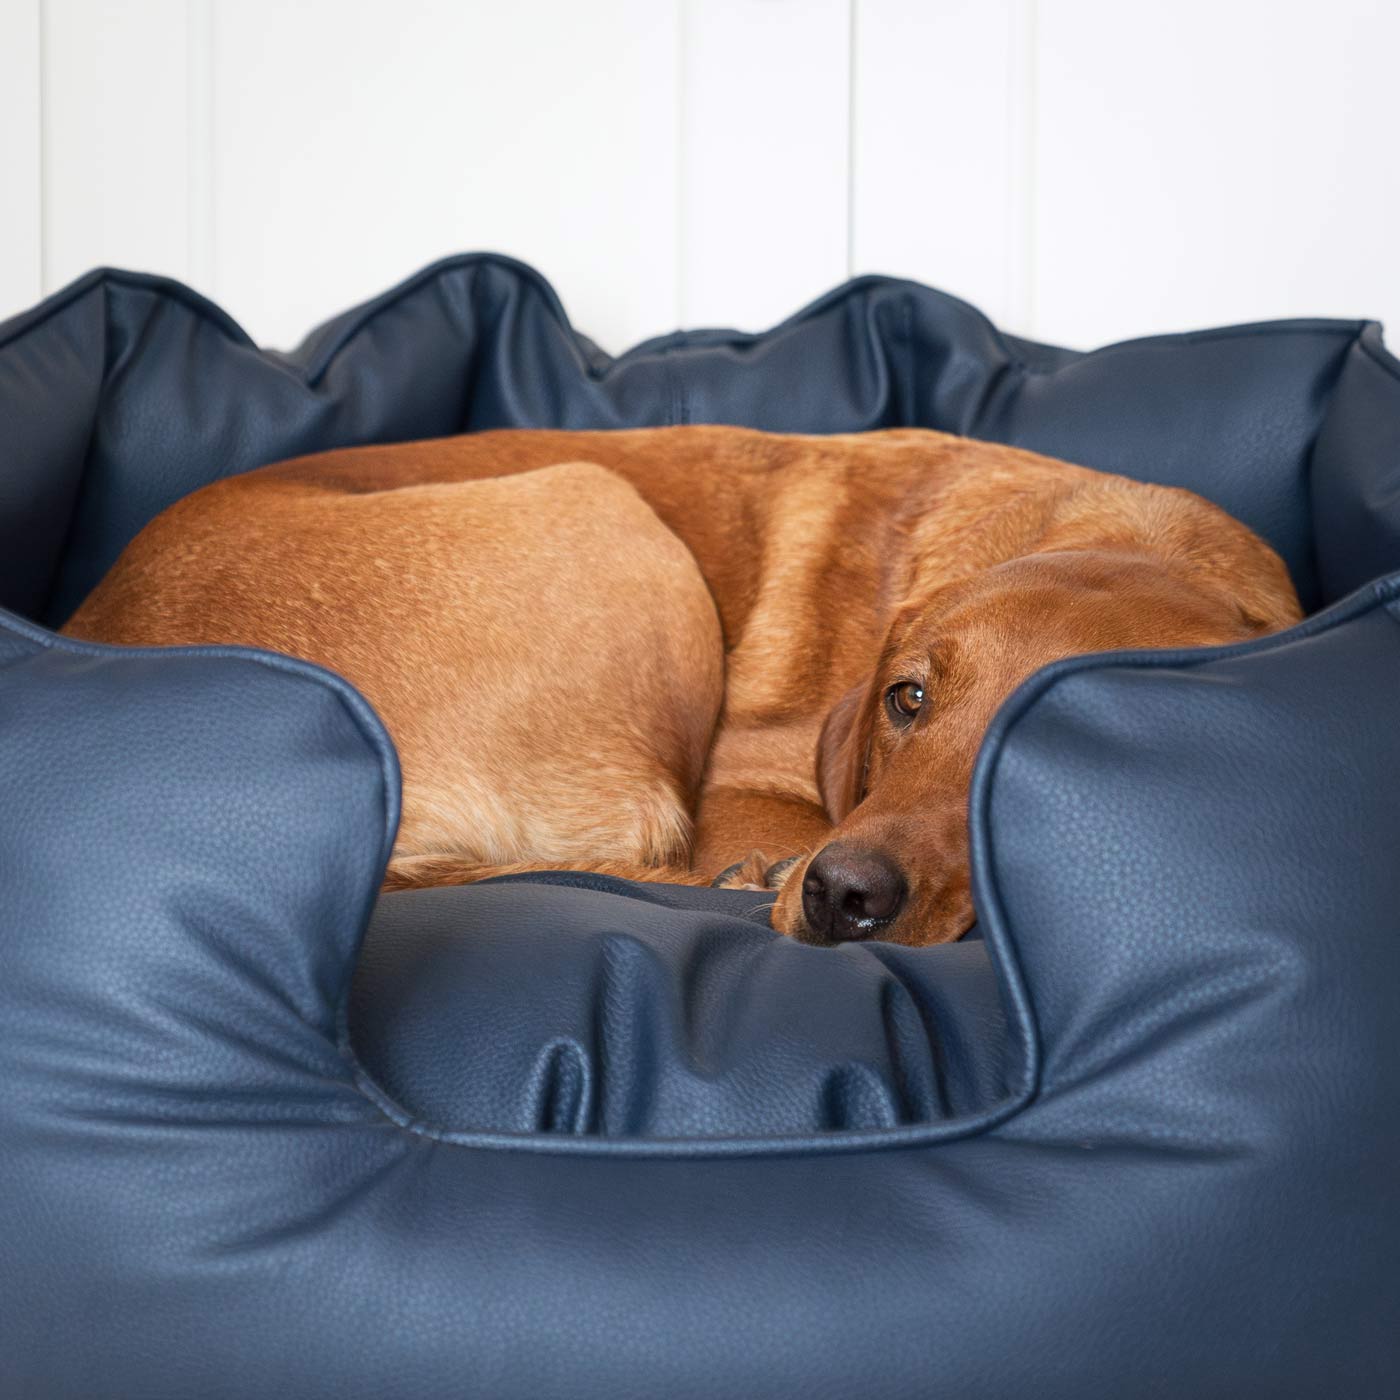 Luxury Handmade High Wall in Rhino Tough Faux Leather, in Pacific, Perfect For Your Pets Nap Time! Available To Personalise at Lords & Labradors